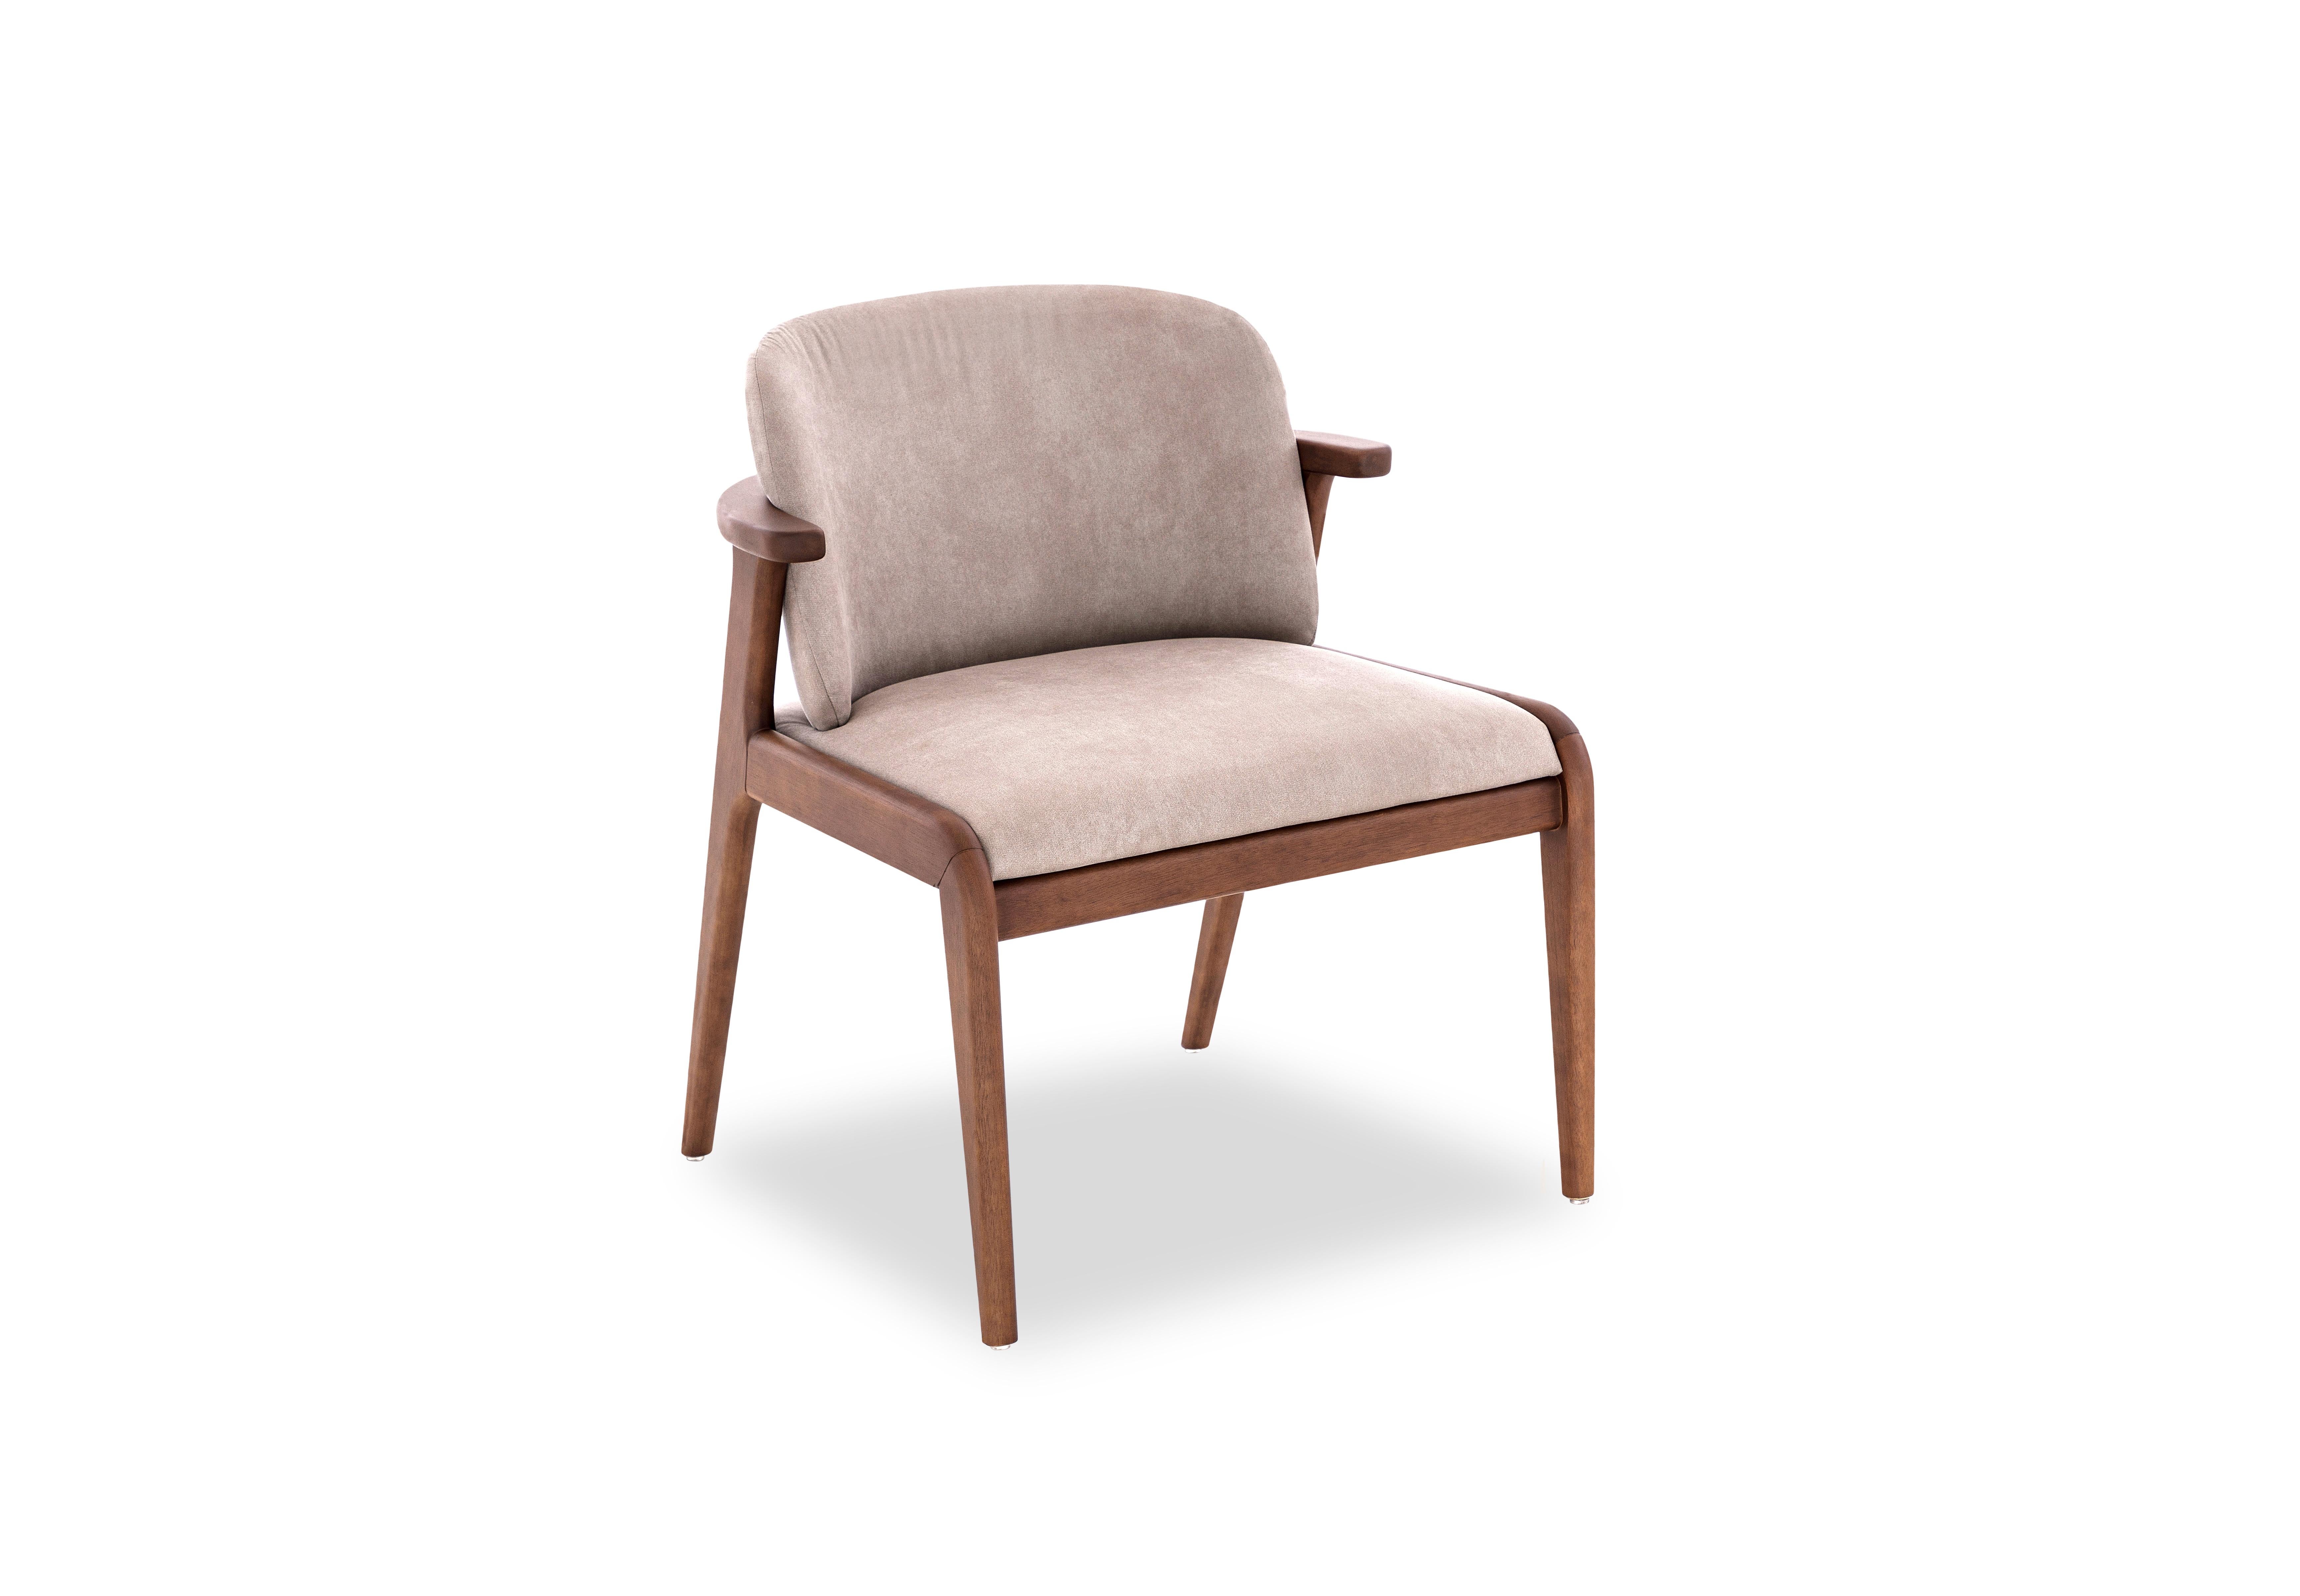 adam court upholstered dining chair